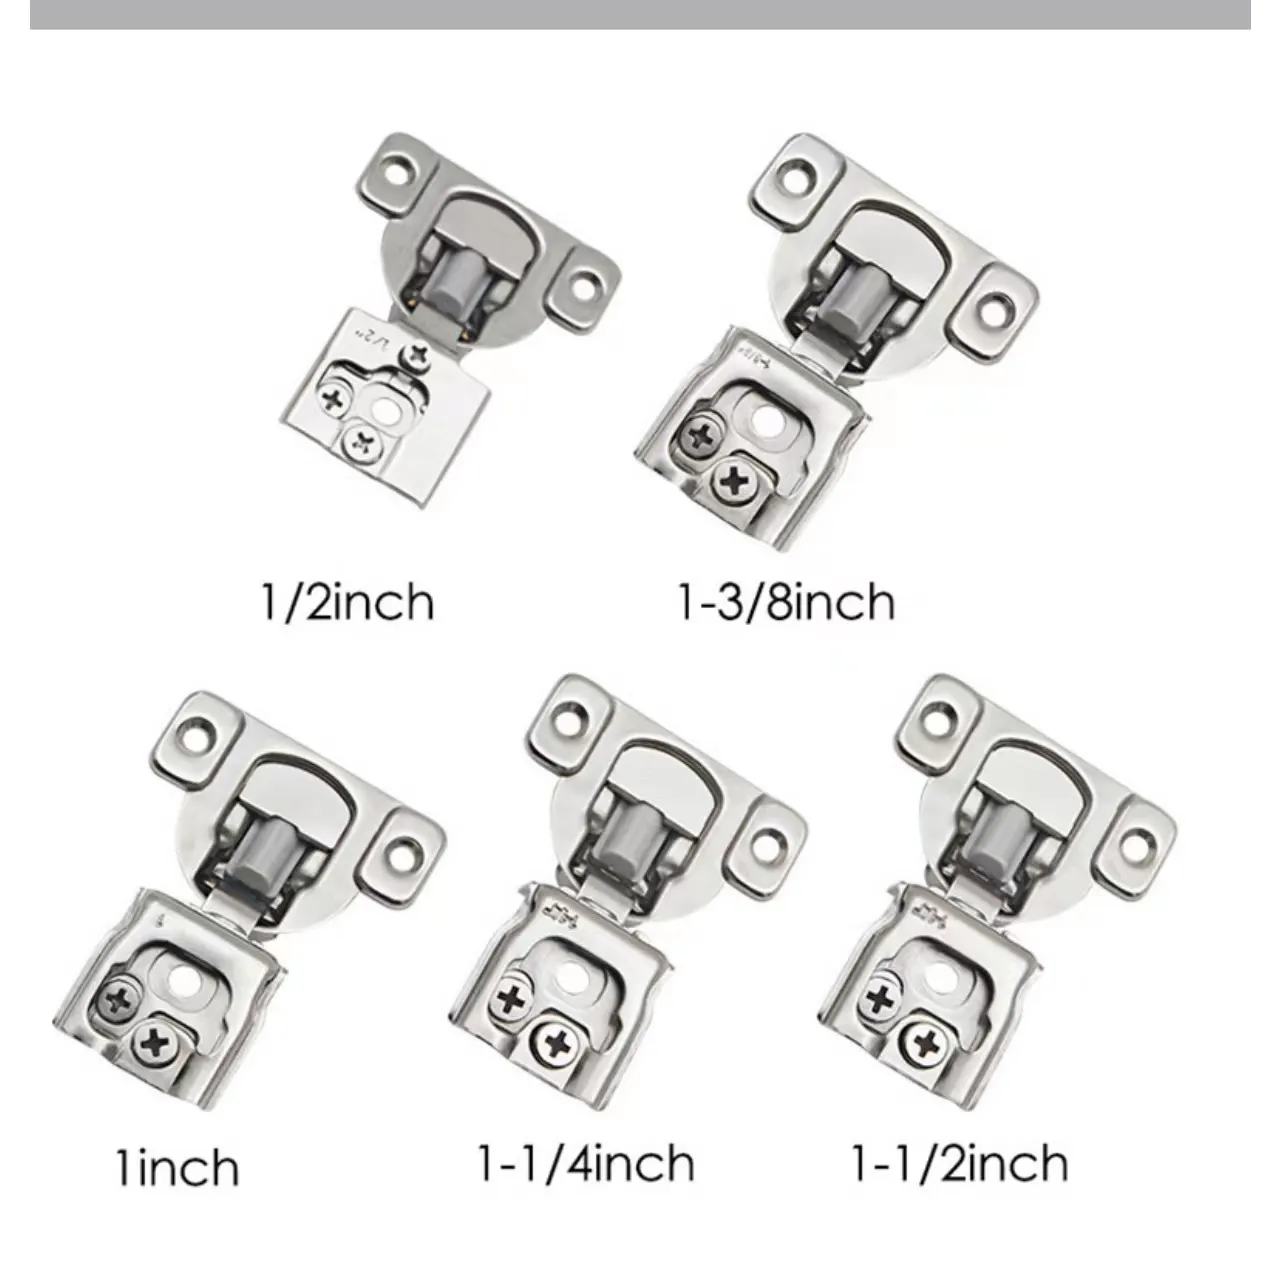 American style Nickel Plated Cabinet Door Face Frame Hinges 3-Way Adjustment with difference size